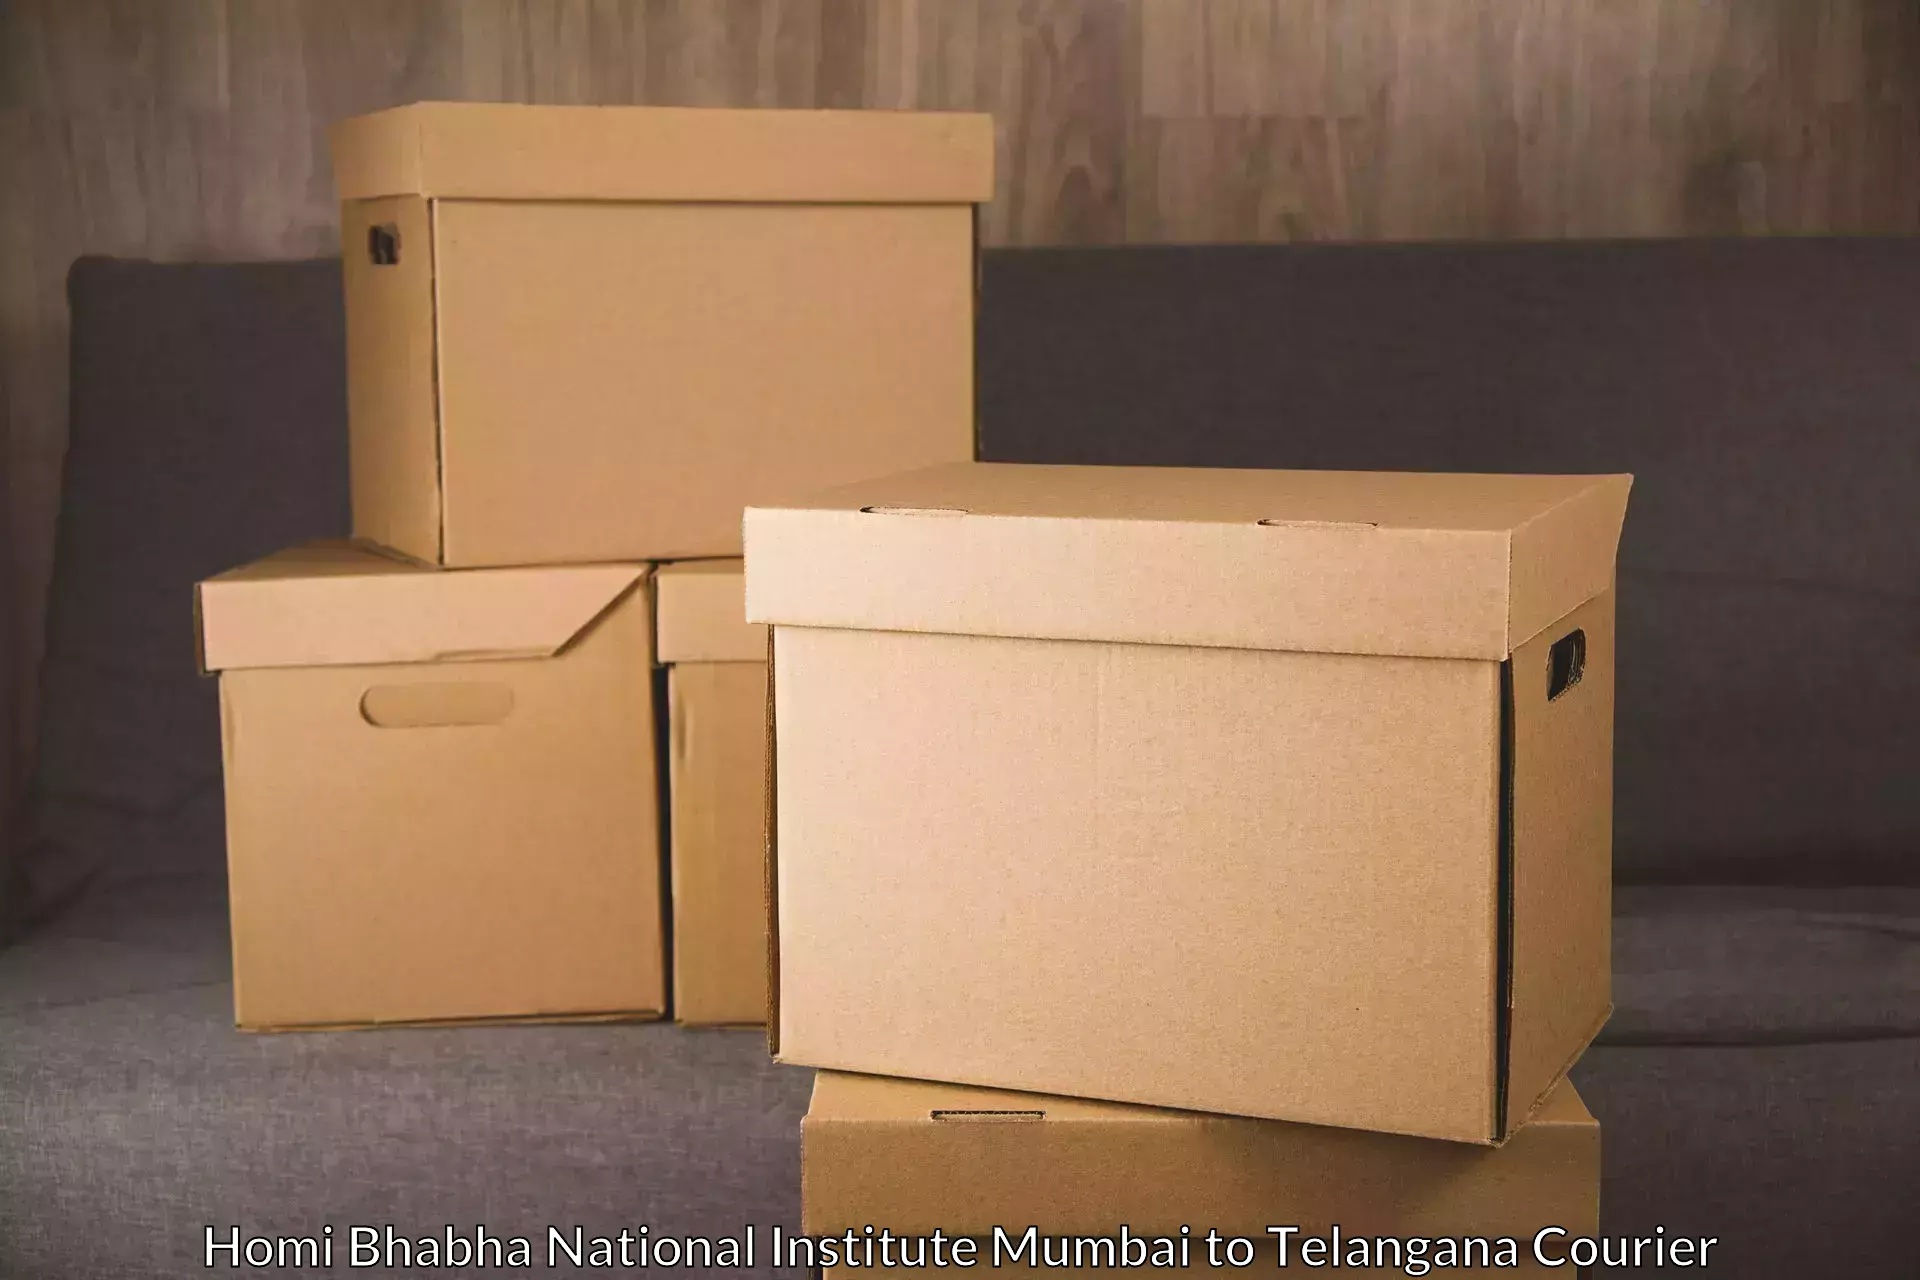 Round-the-clock parcel delivery Homi Bhabha National Institute Mumbai to International Institute of Information Technology Hyderabad